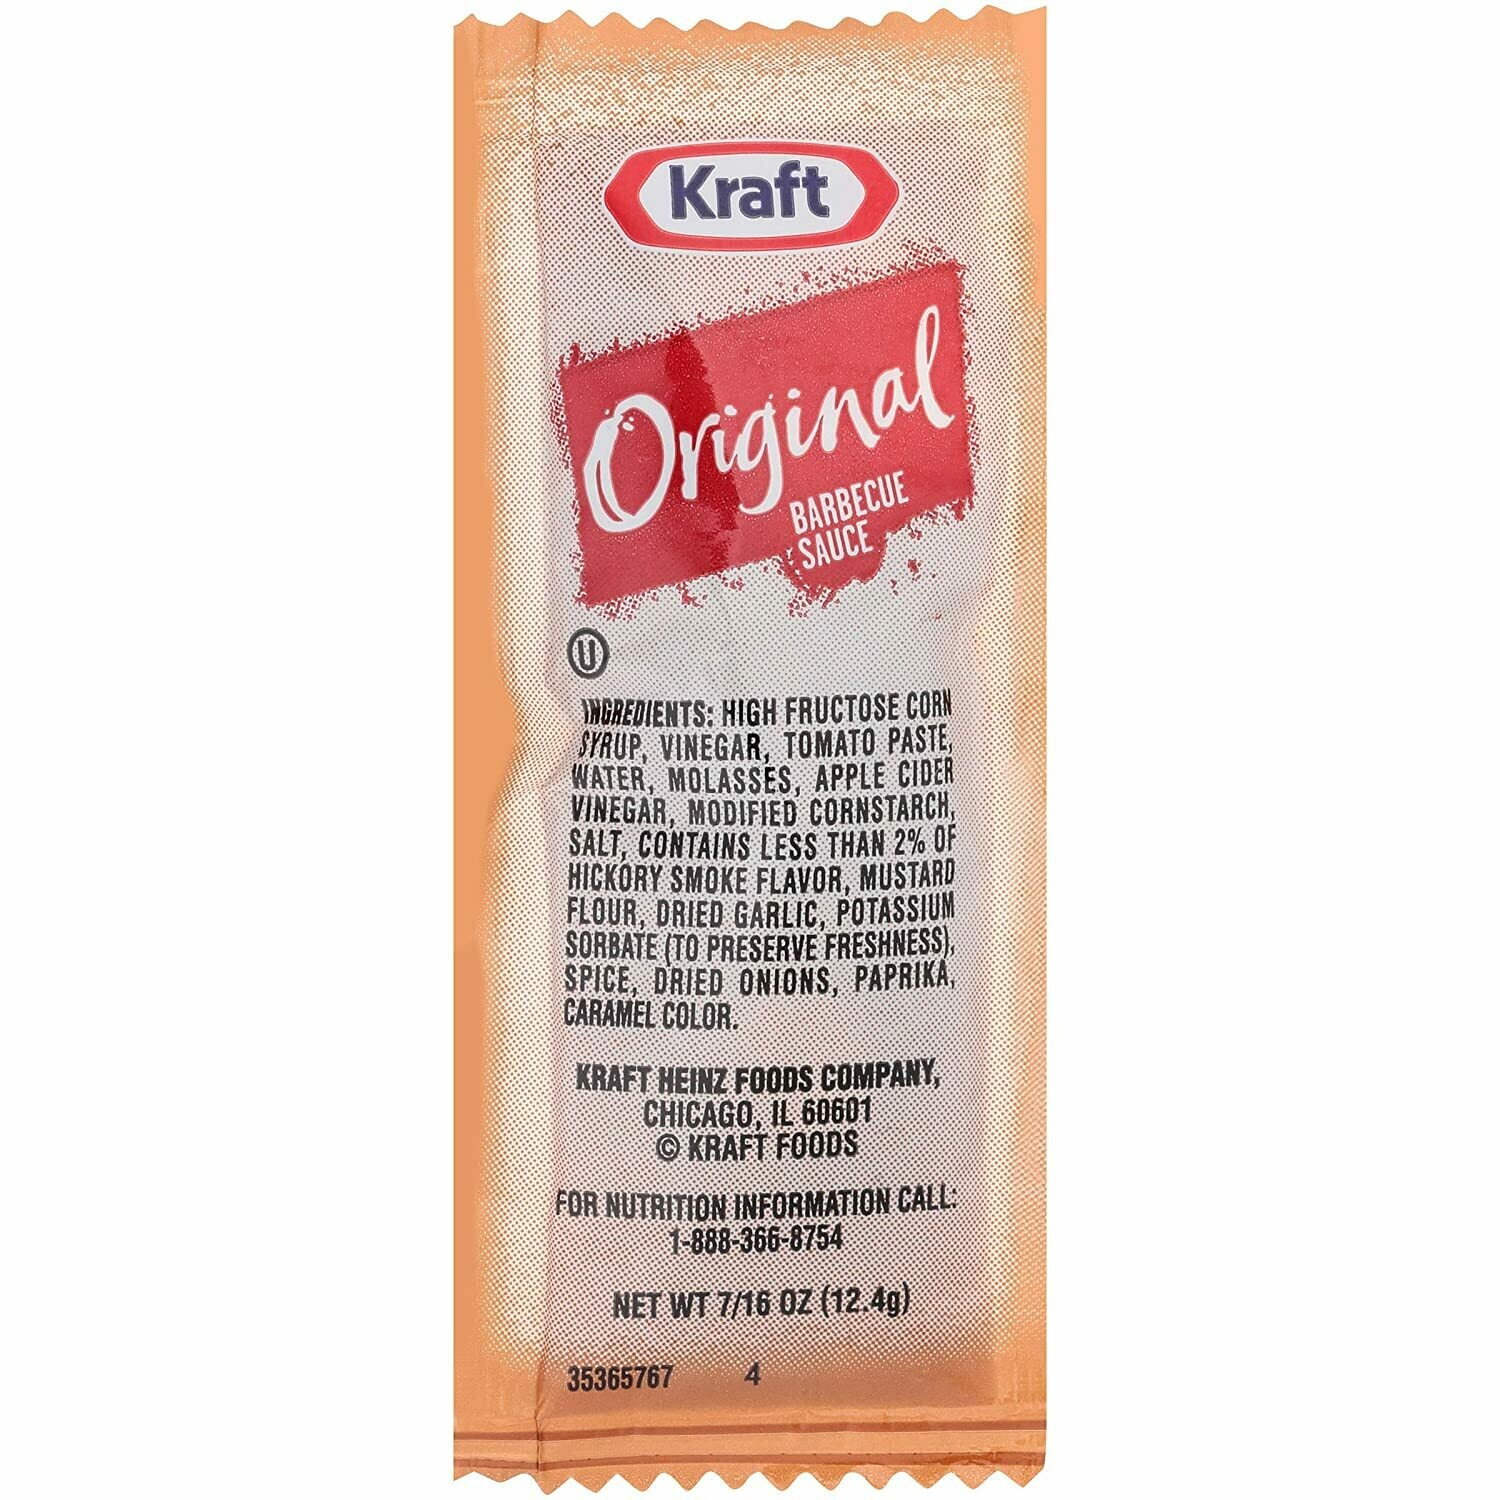 Barbecue Sauce packets 10ct (1501)